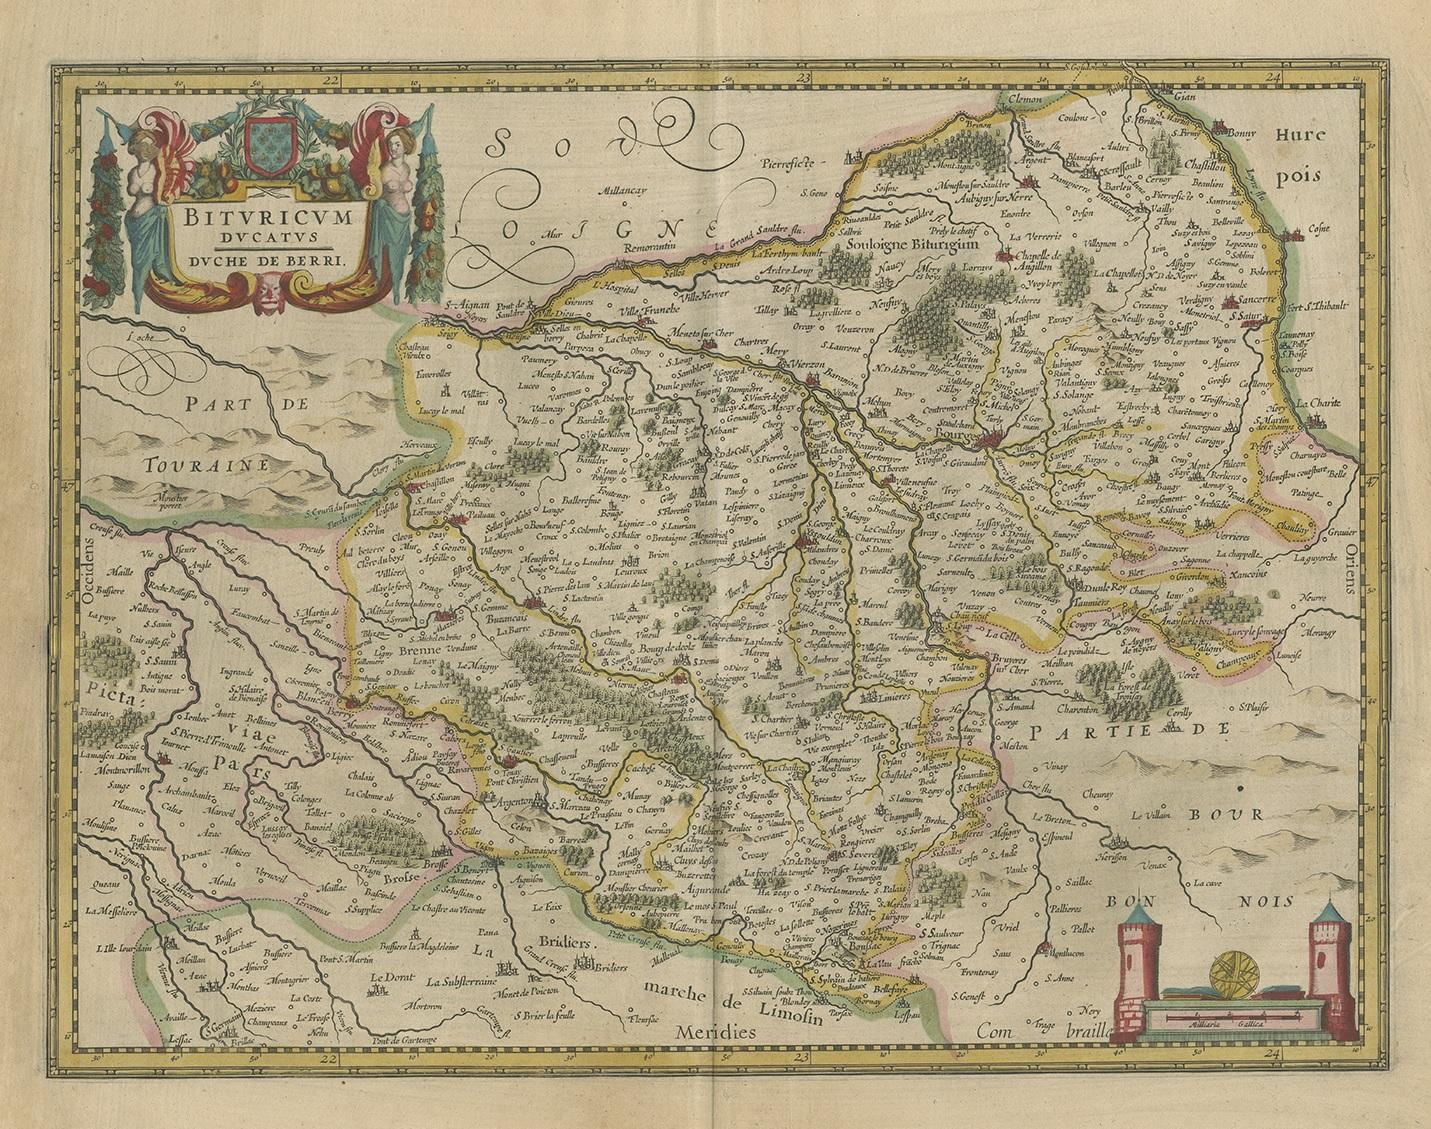 Antique map titled 'Bituricum ducatus - Duche de Berri'. Decorative map of the Berry region, France. Berry is a region located in the center of France. It was a province of France until départements replaced the provinces on 4 March 1790, when Berry